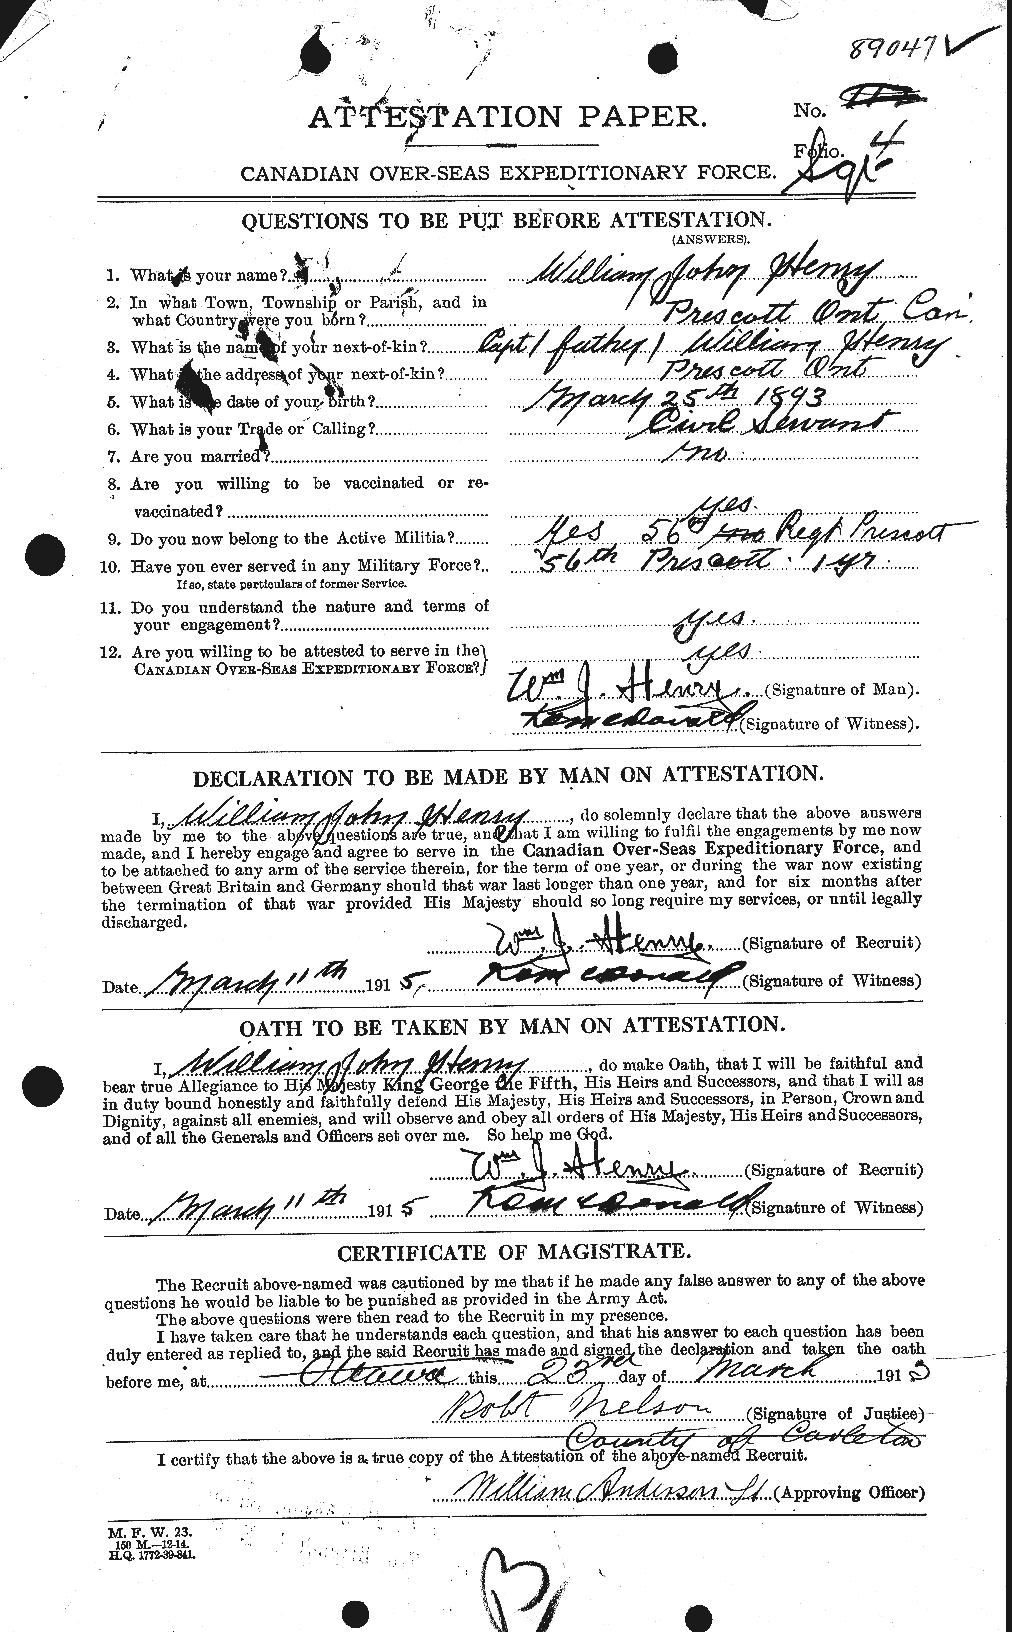 Personnel Records of the First World War - CEF 387786a